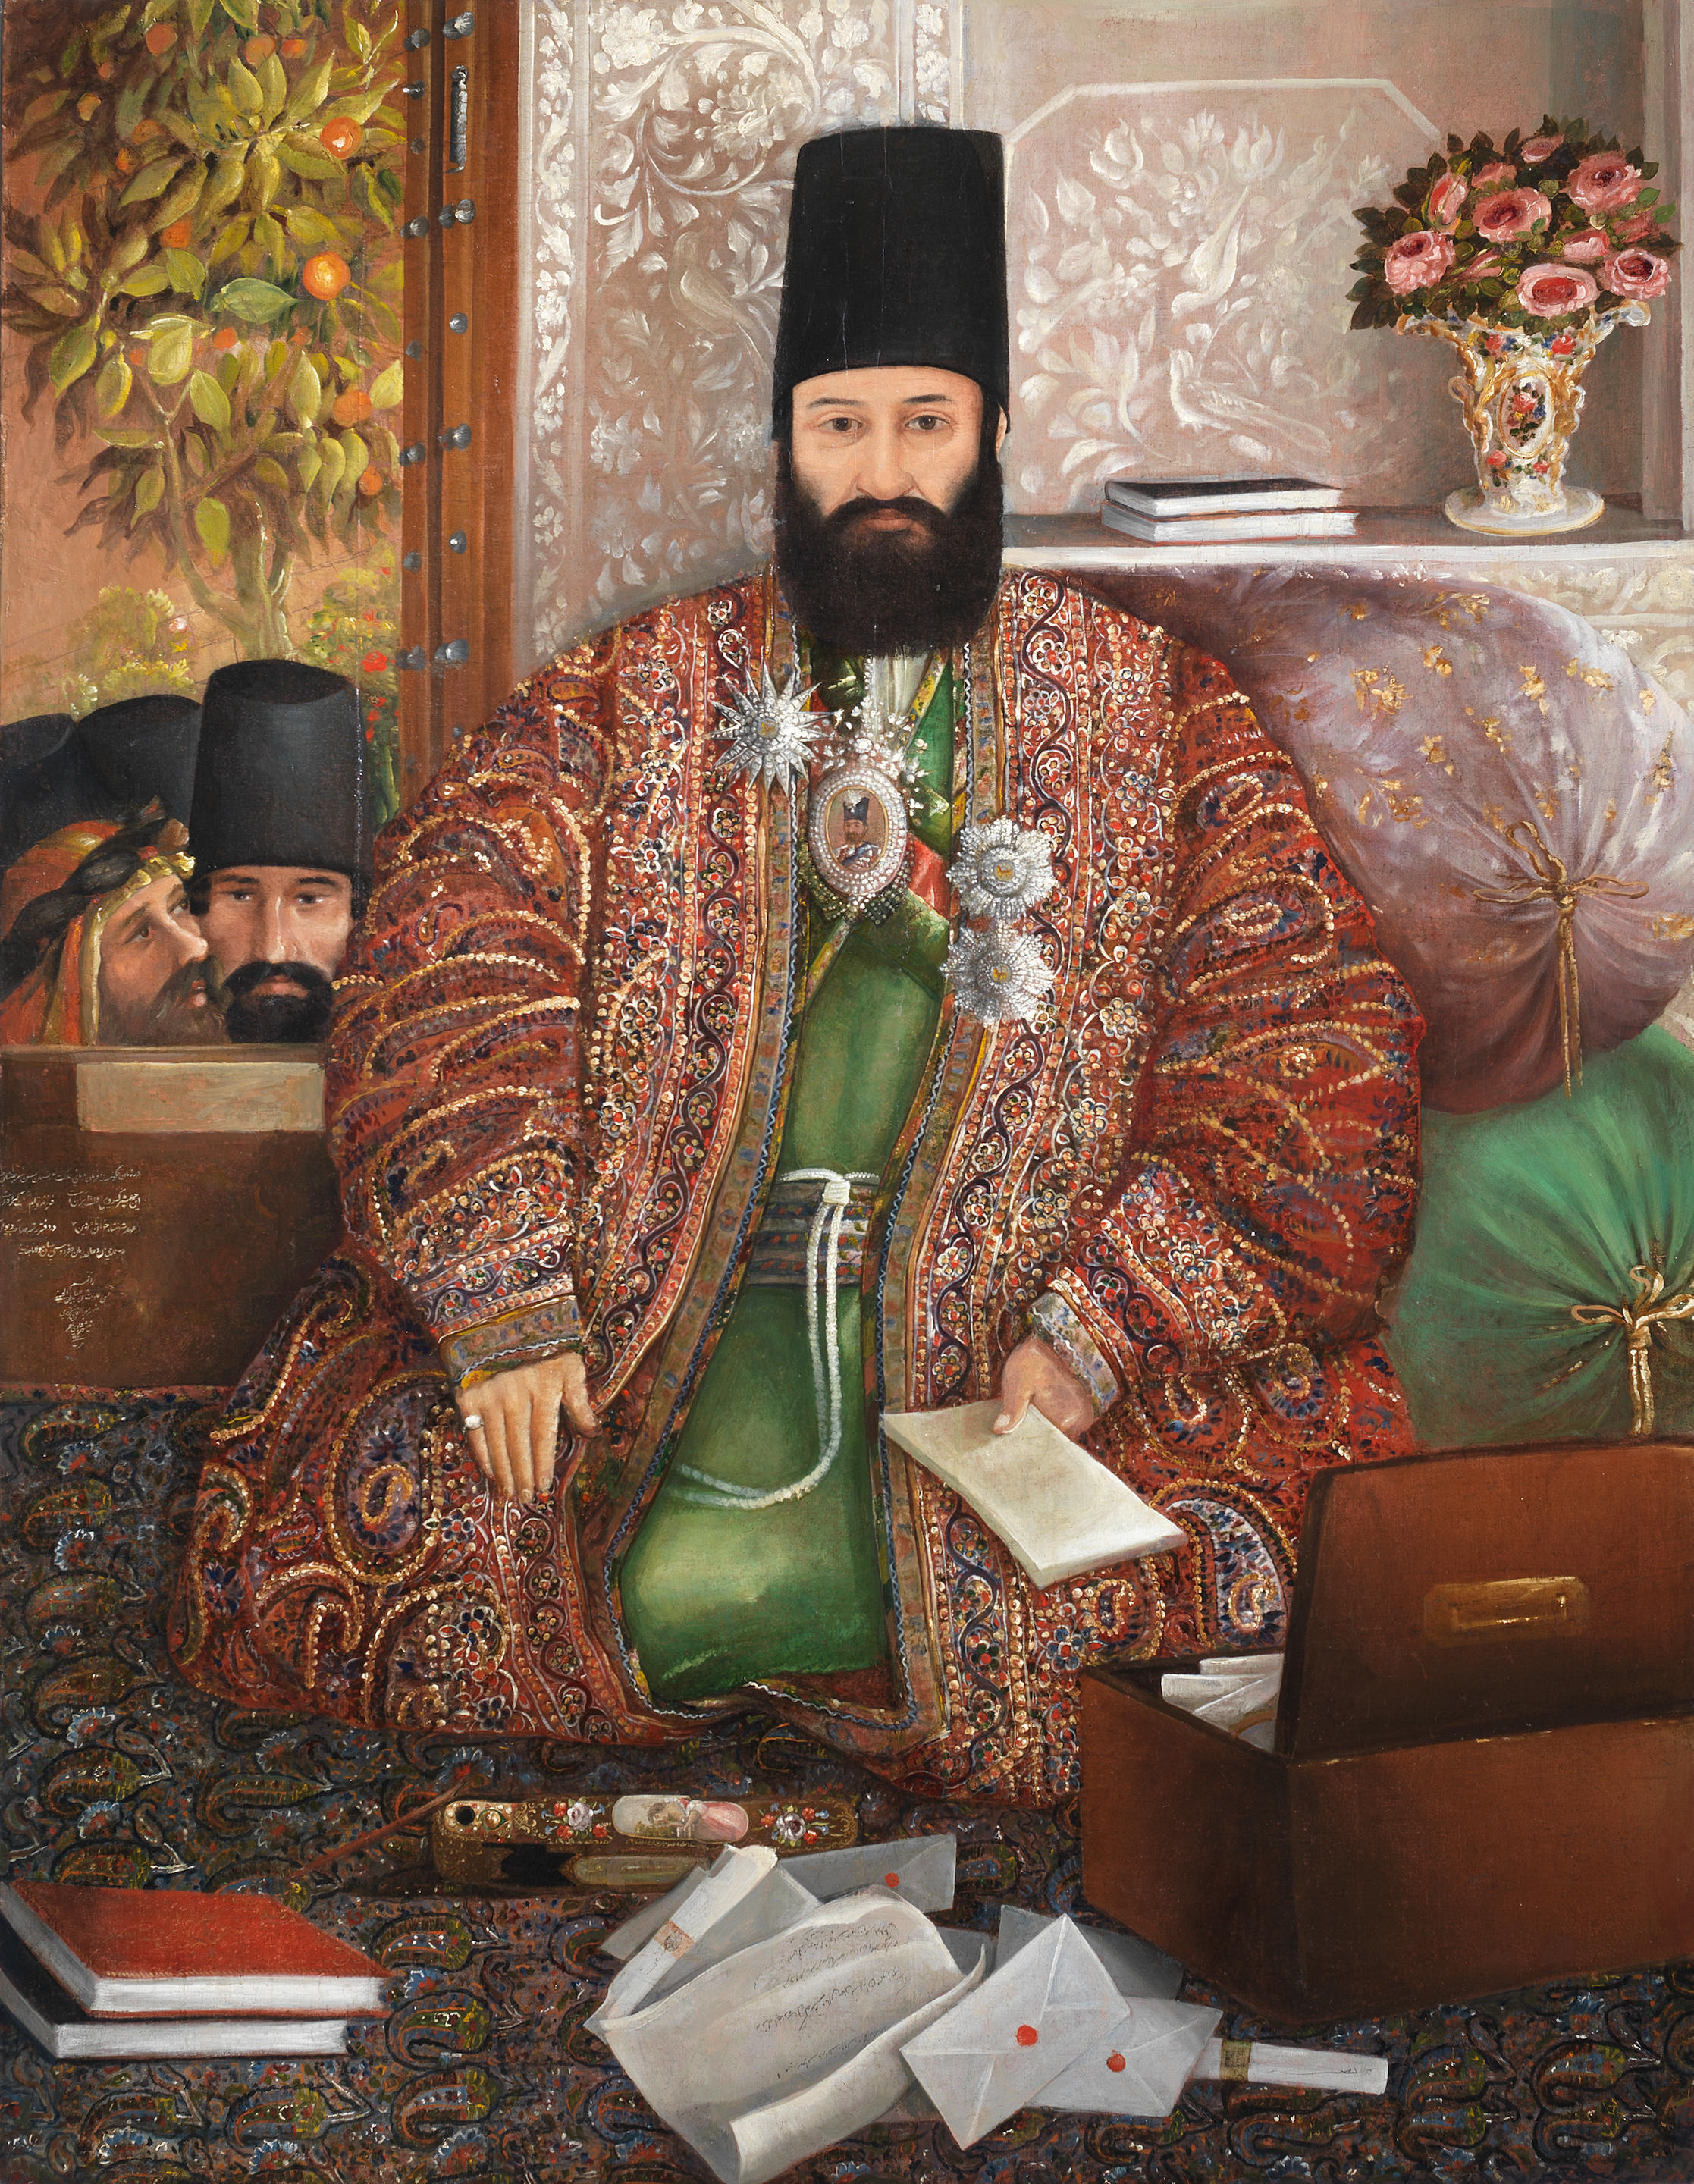 A portrait of the Governor of Khuzestan, Khanlar Mirza Ehtesham ol-Dowleh, just over the age of 40. The portrait was dated November 1866 and inscribed by Zayn al-'Abidin al-Husayni.[65]